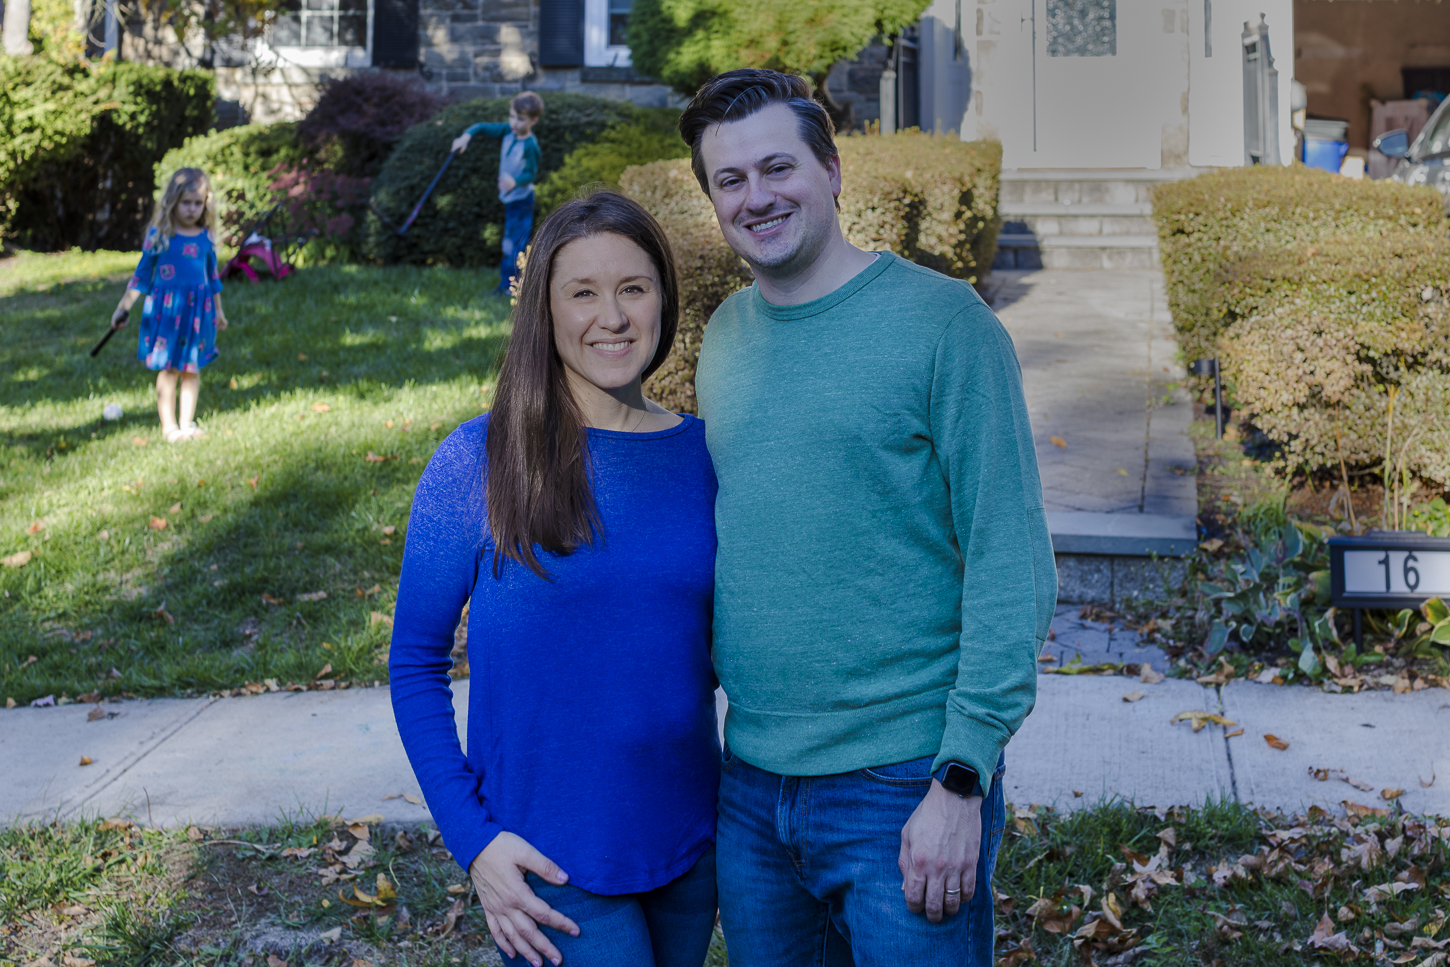 Jessica York poses with her husband in front of the driveway of their home in New Jersey. In the background, their young son and daughter are running around and playing with one another. Jessica is wearing a blue shirt and blue jeans, and her husband is wearing a green sweater and blue jeans. Their daughter is wearing a floral blue dress, and their son is wearing a gray and green henley shirt with blue jeans.